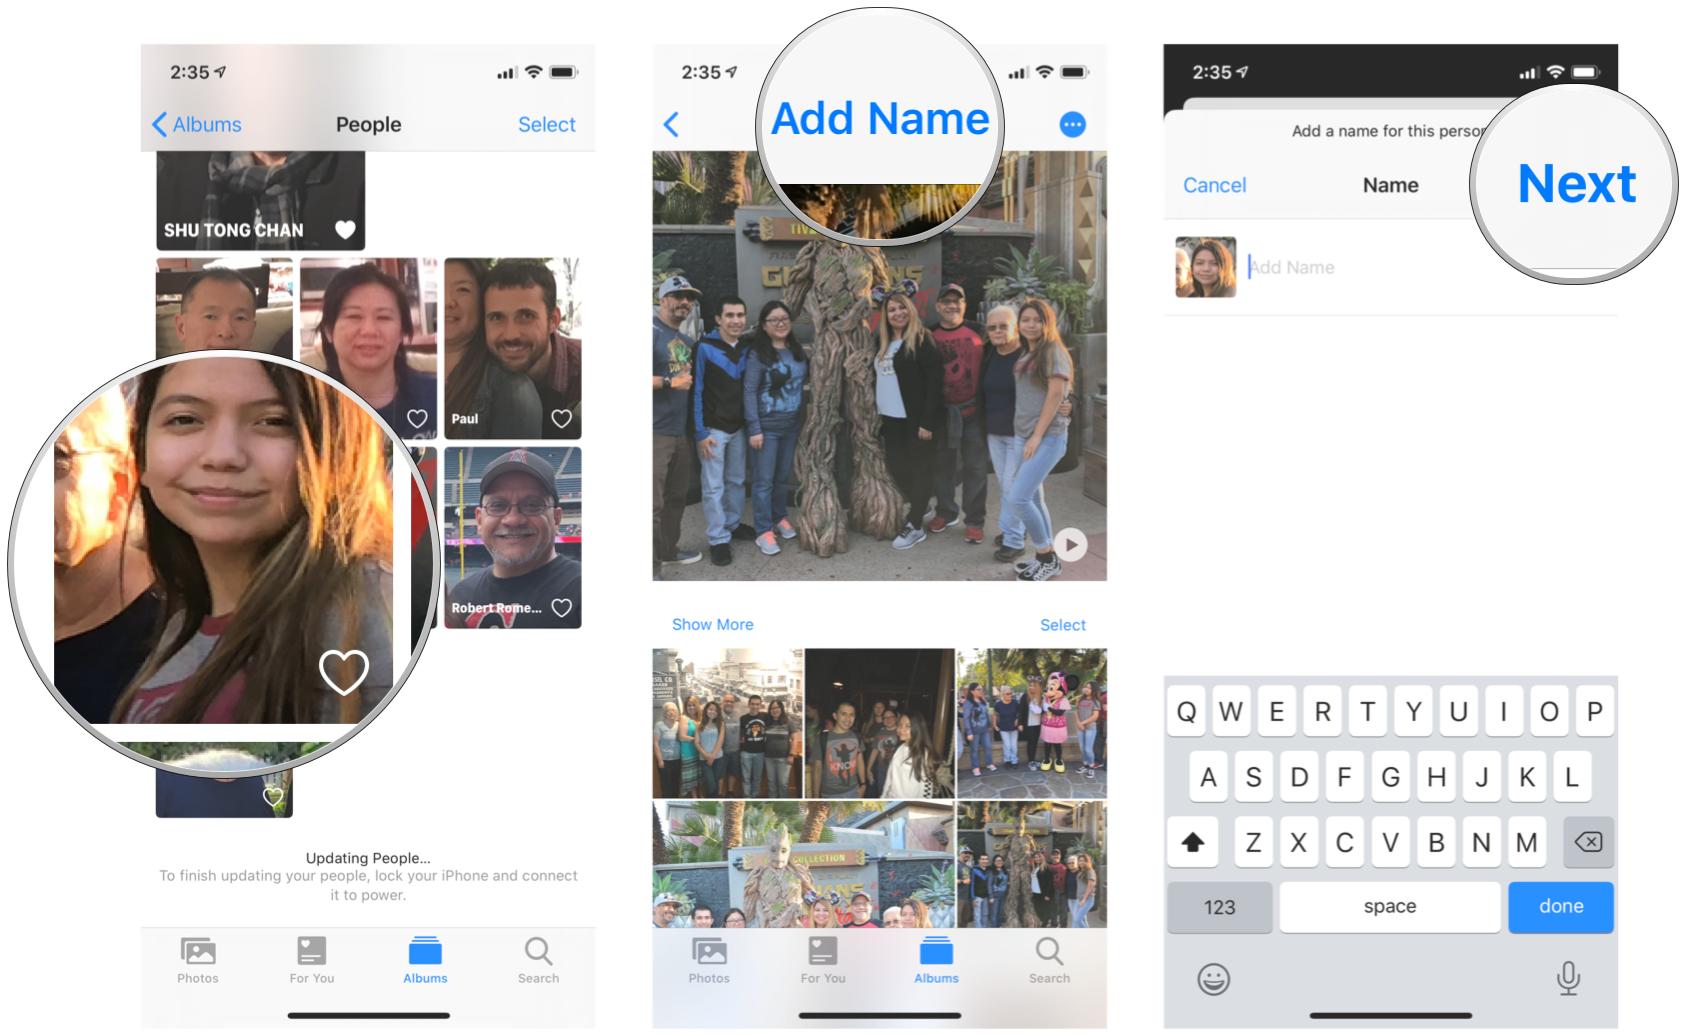 Add names to people in the Photos app on iPhone and iPad by showing steps: In the People album, tap on an unnamed person, tap Add Name, input their name, then Confirm